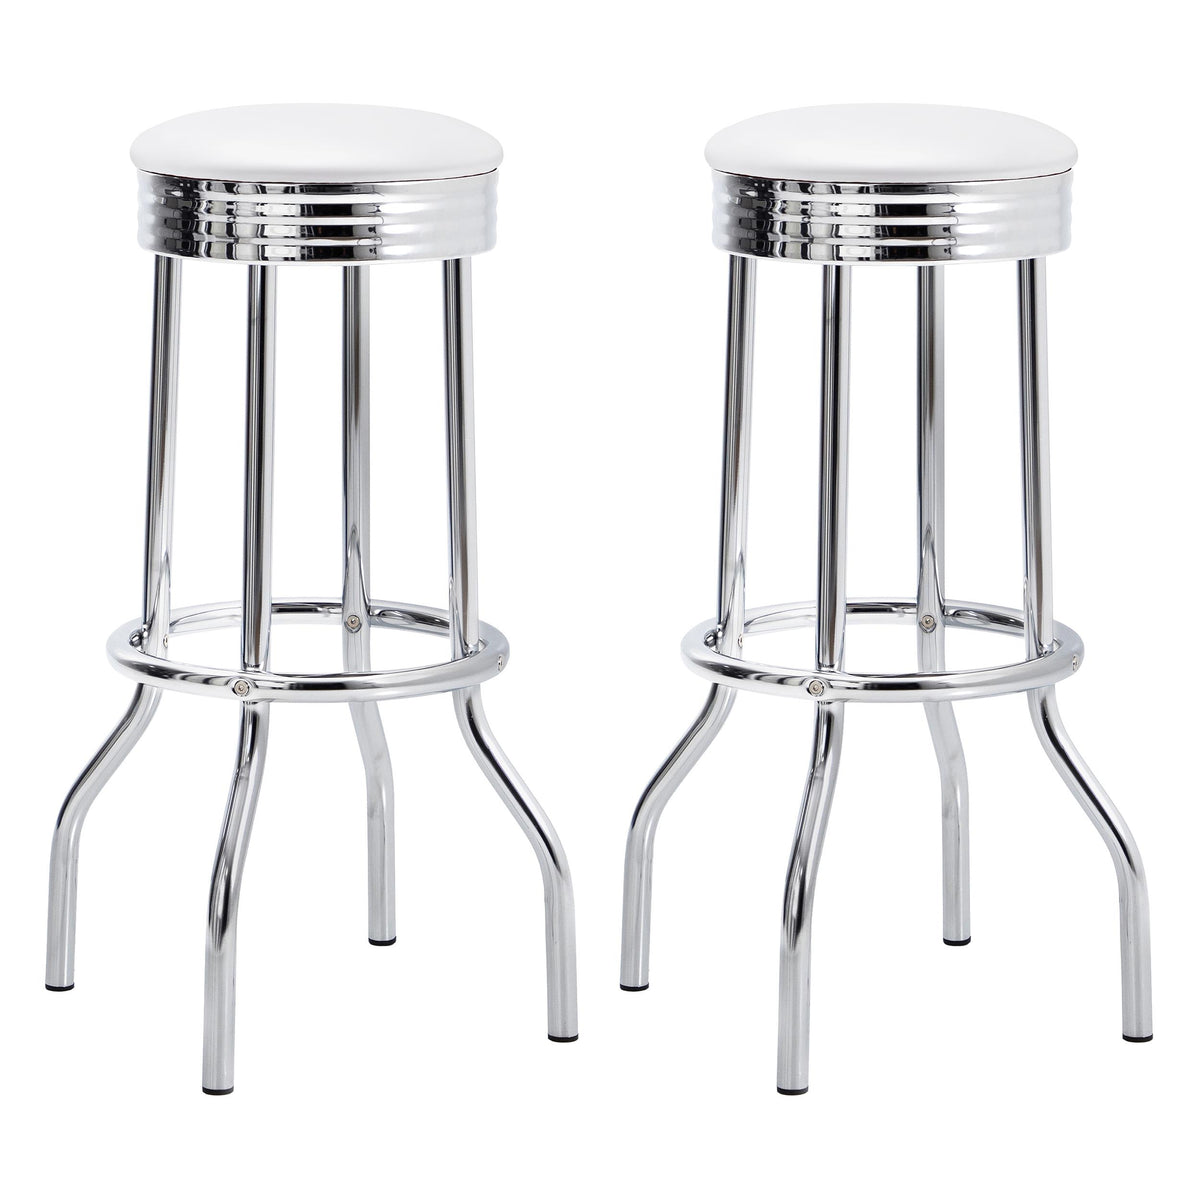 Theodore Upholstered Top Bar Stools White and Chrome (Set of 2)  Half Price Furniture